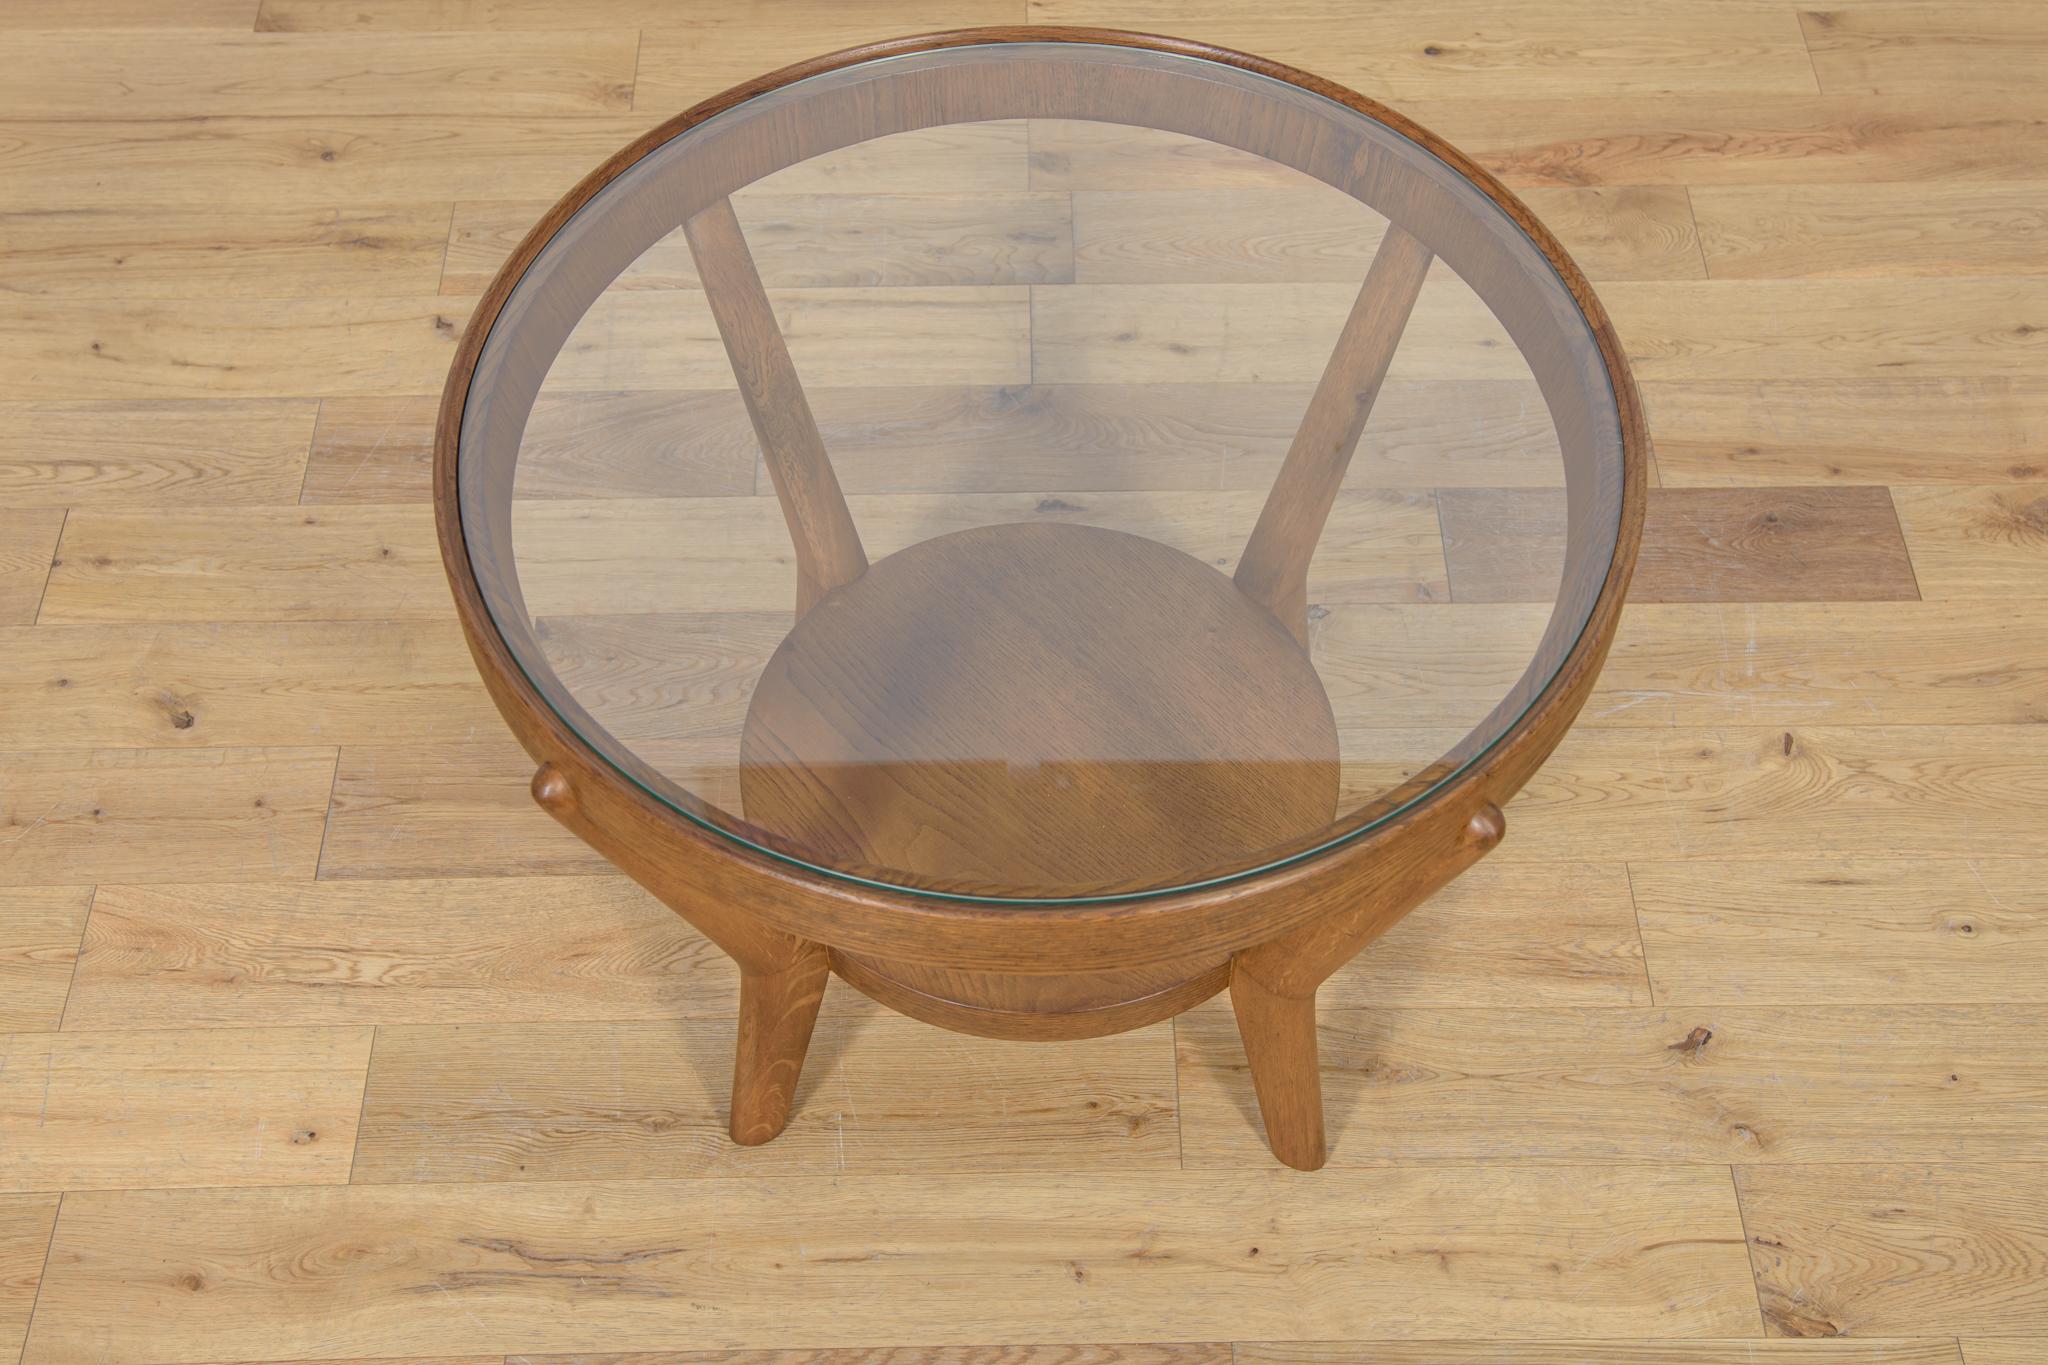 A round coffee table designed by architect duo K. Kozelka & A. Kropacek in 1944. Produced by Interier Praha in the 40's. The design won second place at the Triennale in Milan in 1946. Light oak wood frame with the glass table top. The oak frame has